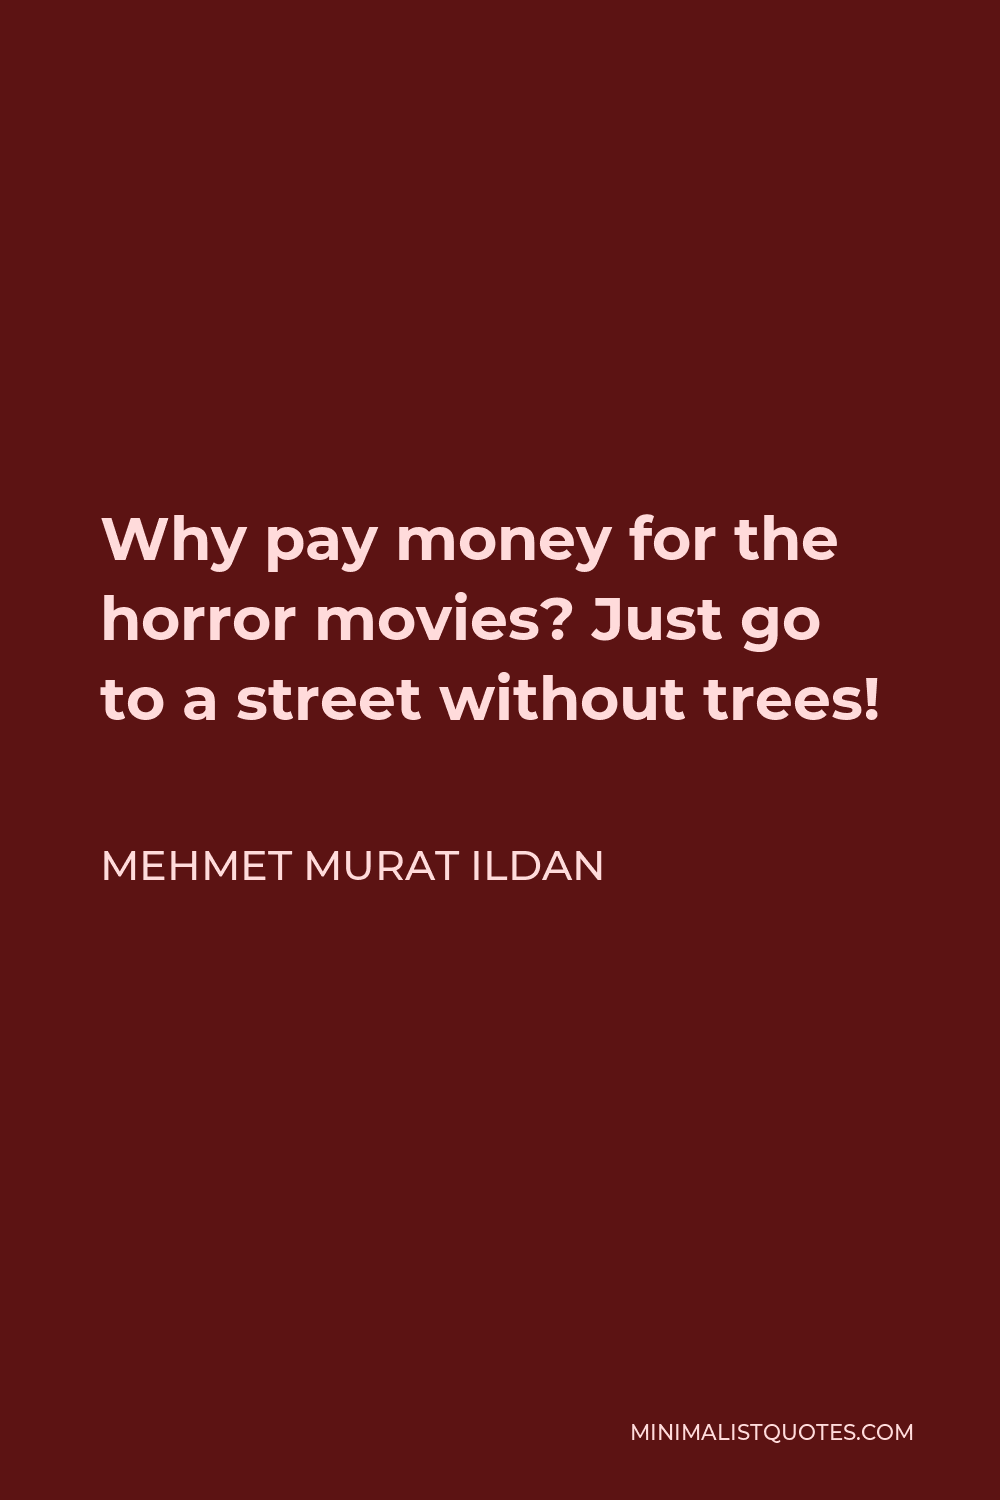 Mehmet Murat Ildan Quote - Why pay money for the horror movies? Just go to a street without trees!